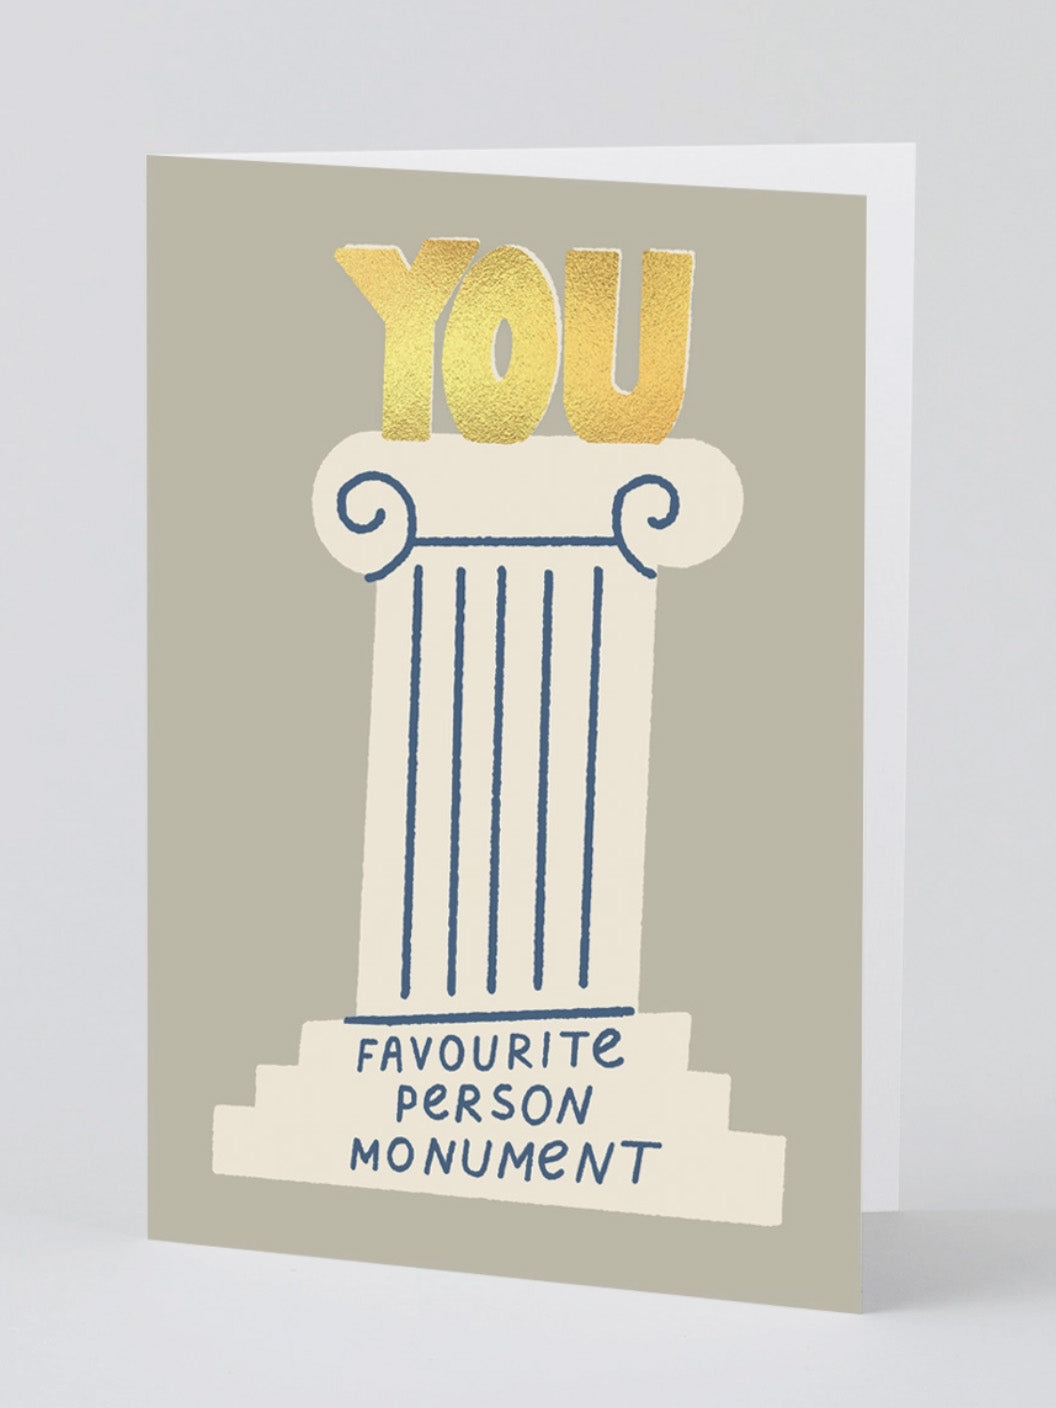 favorite person monument card